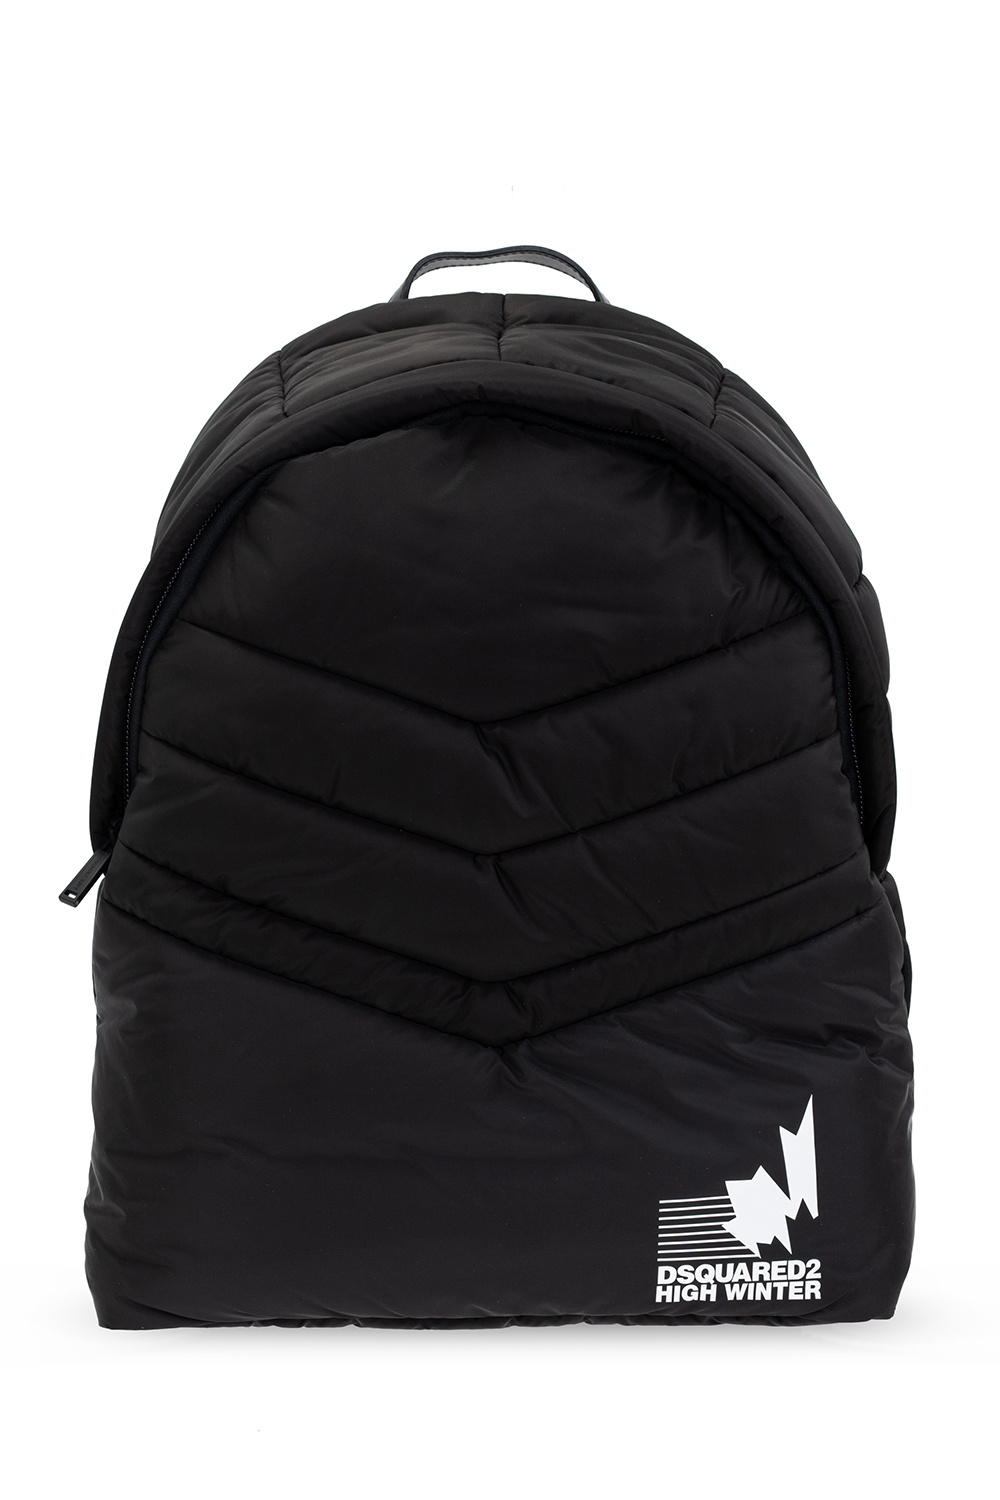 Dsquared2 opus backpack with logo